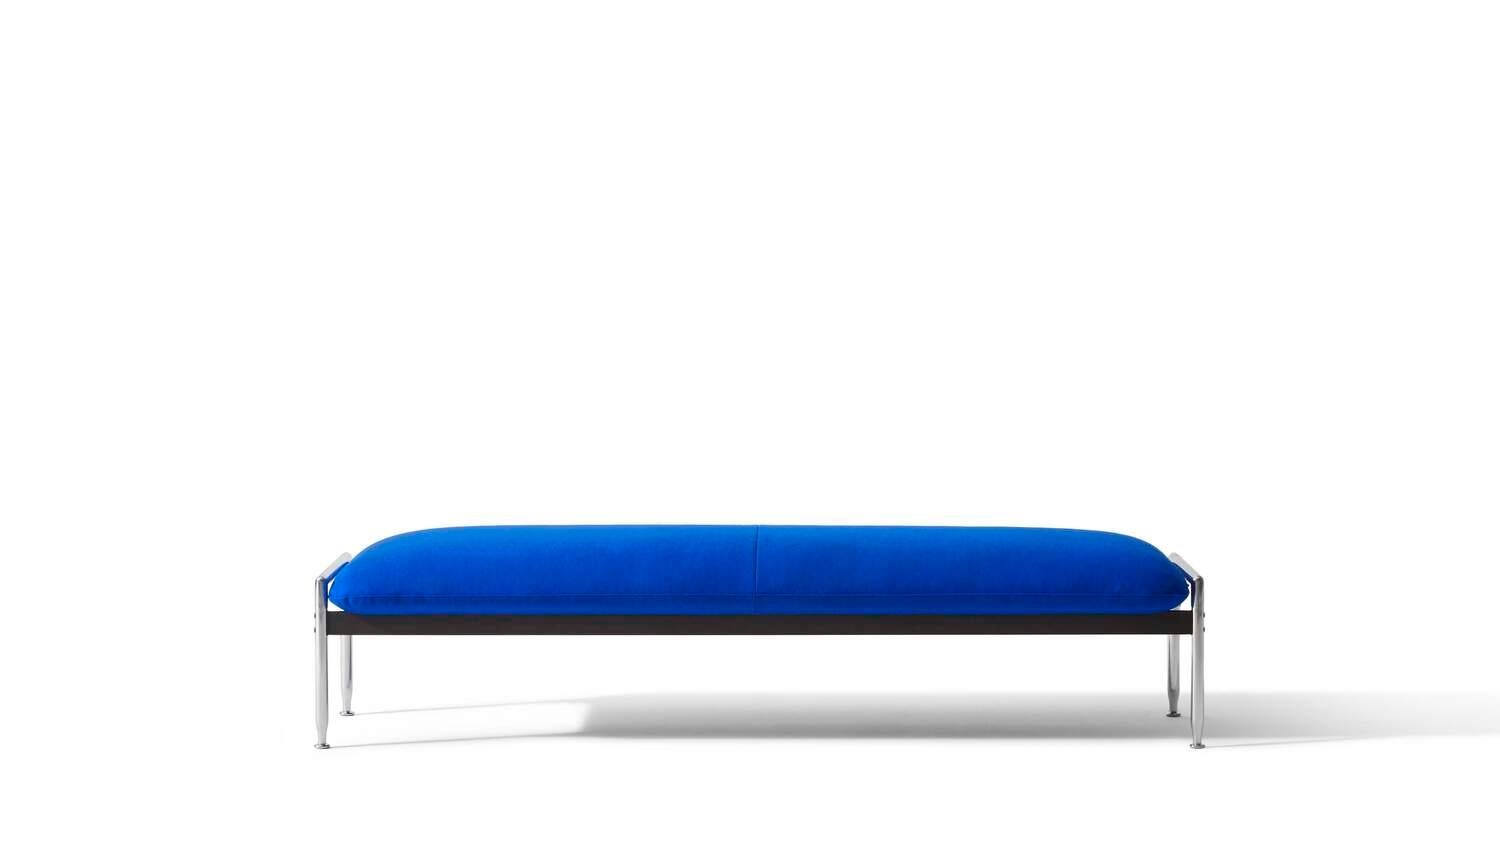 Antonio Citterio Esosoft bench
Manufactured by Cassina in Itlay

A living room system designed to define the domestic landscape in a fluid, flexible manner. This is Esosoft ? the first project by Antonio Citterio for Cassina ? a modular sofa that